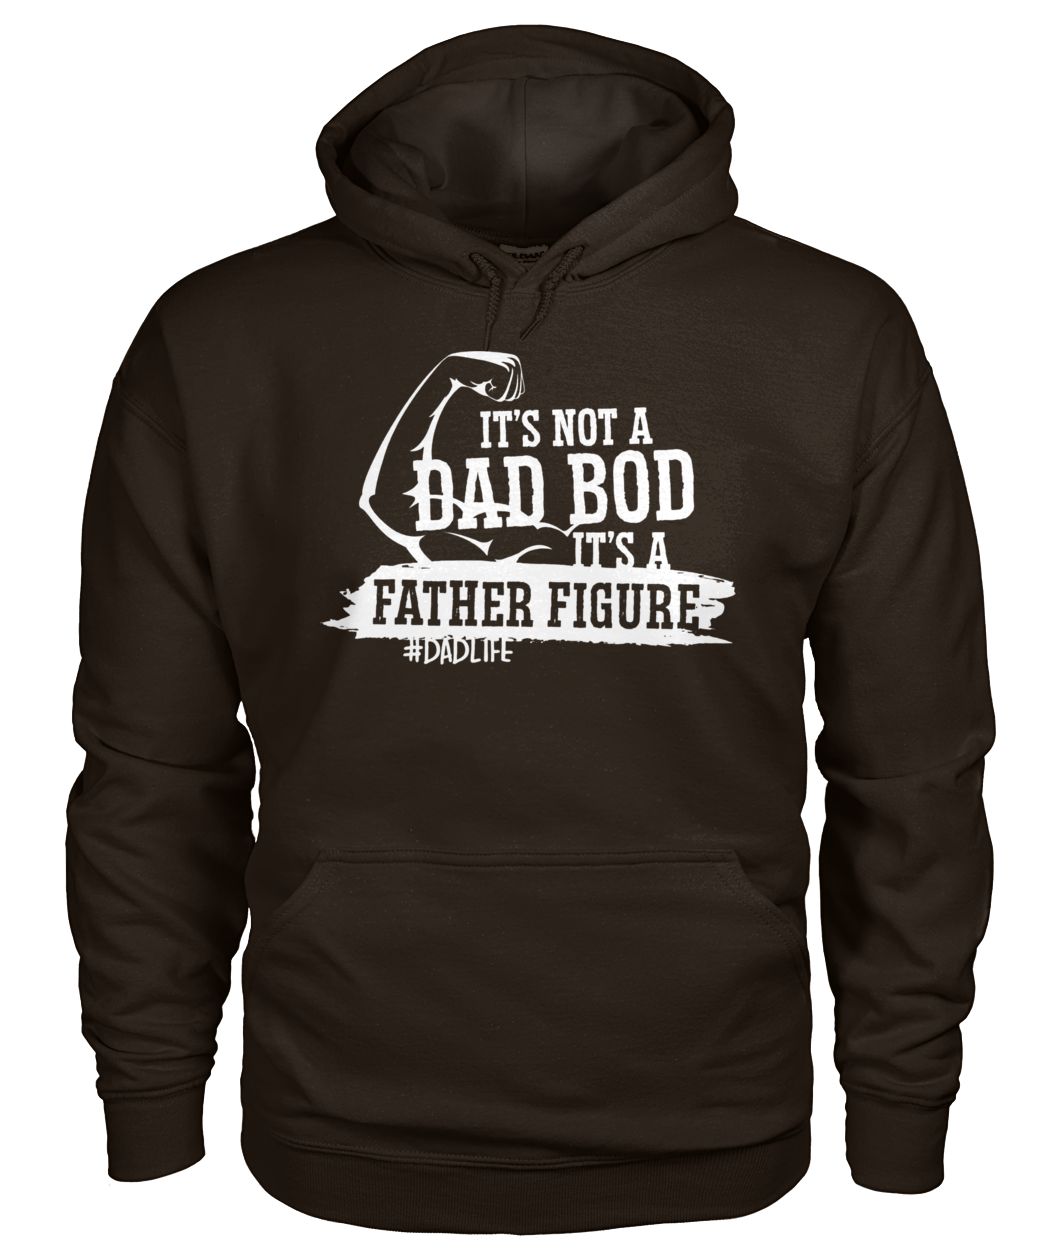 It's not a dad bod it's a father figure with arm gildan hoodie